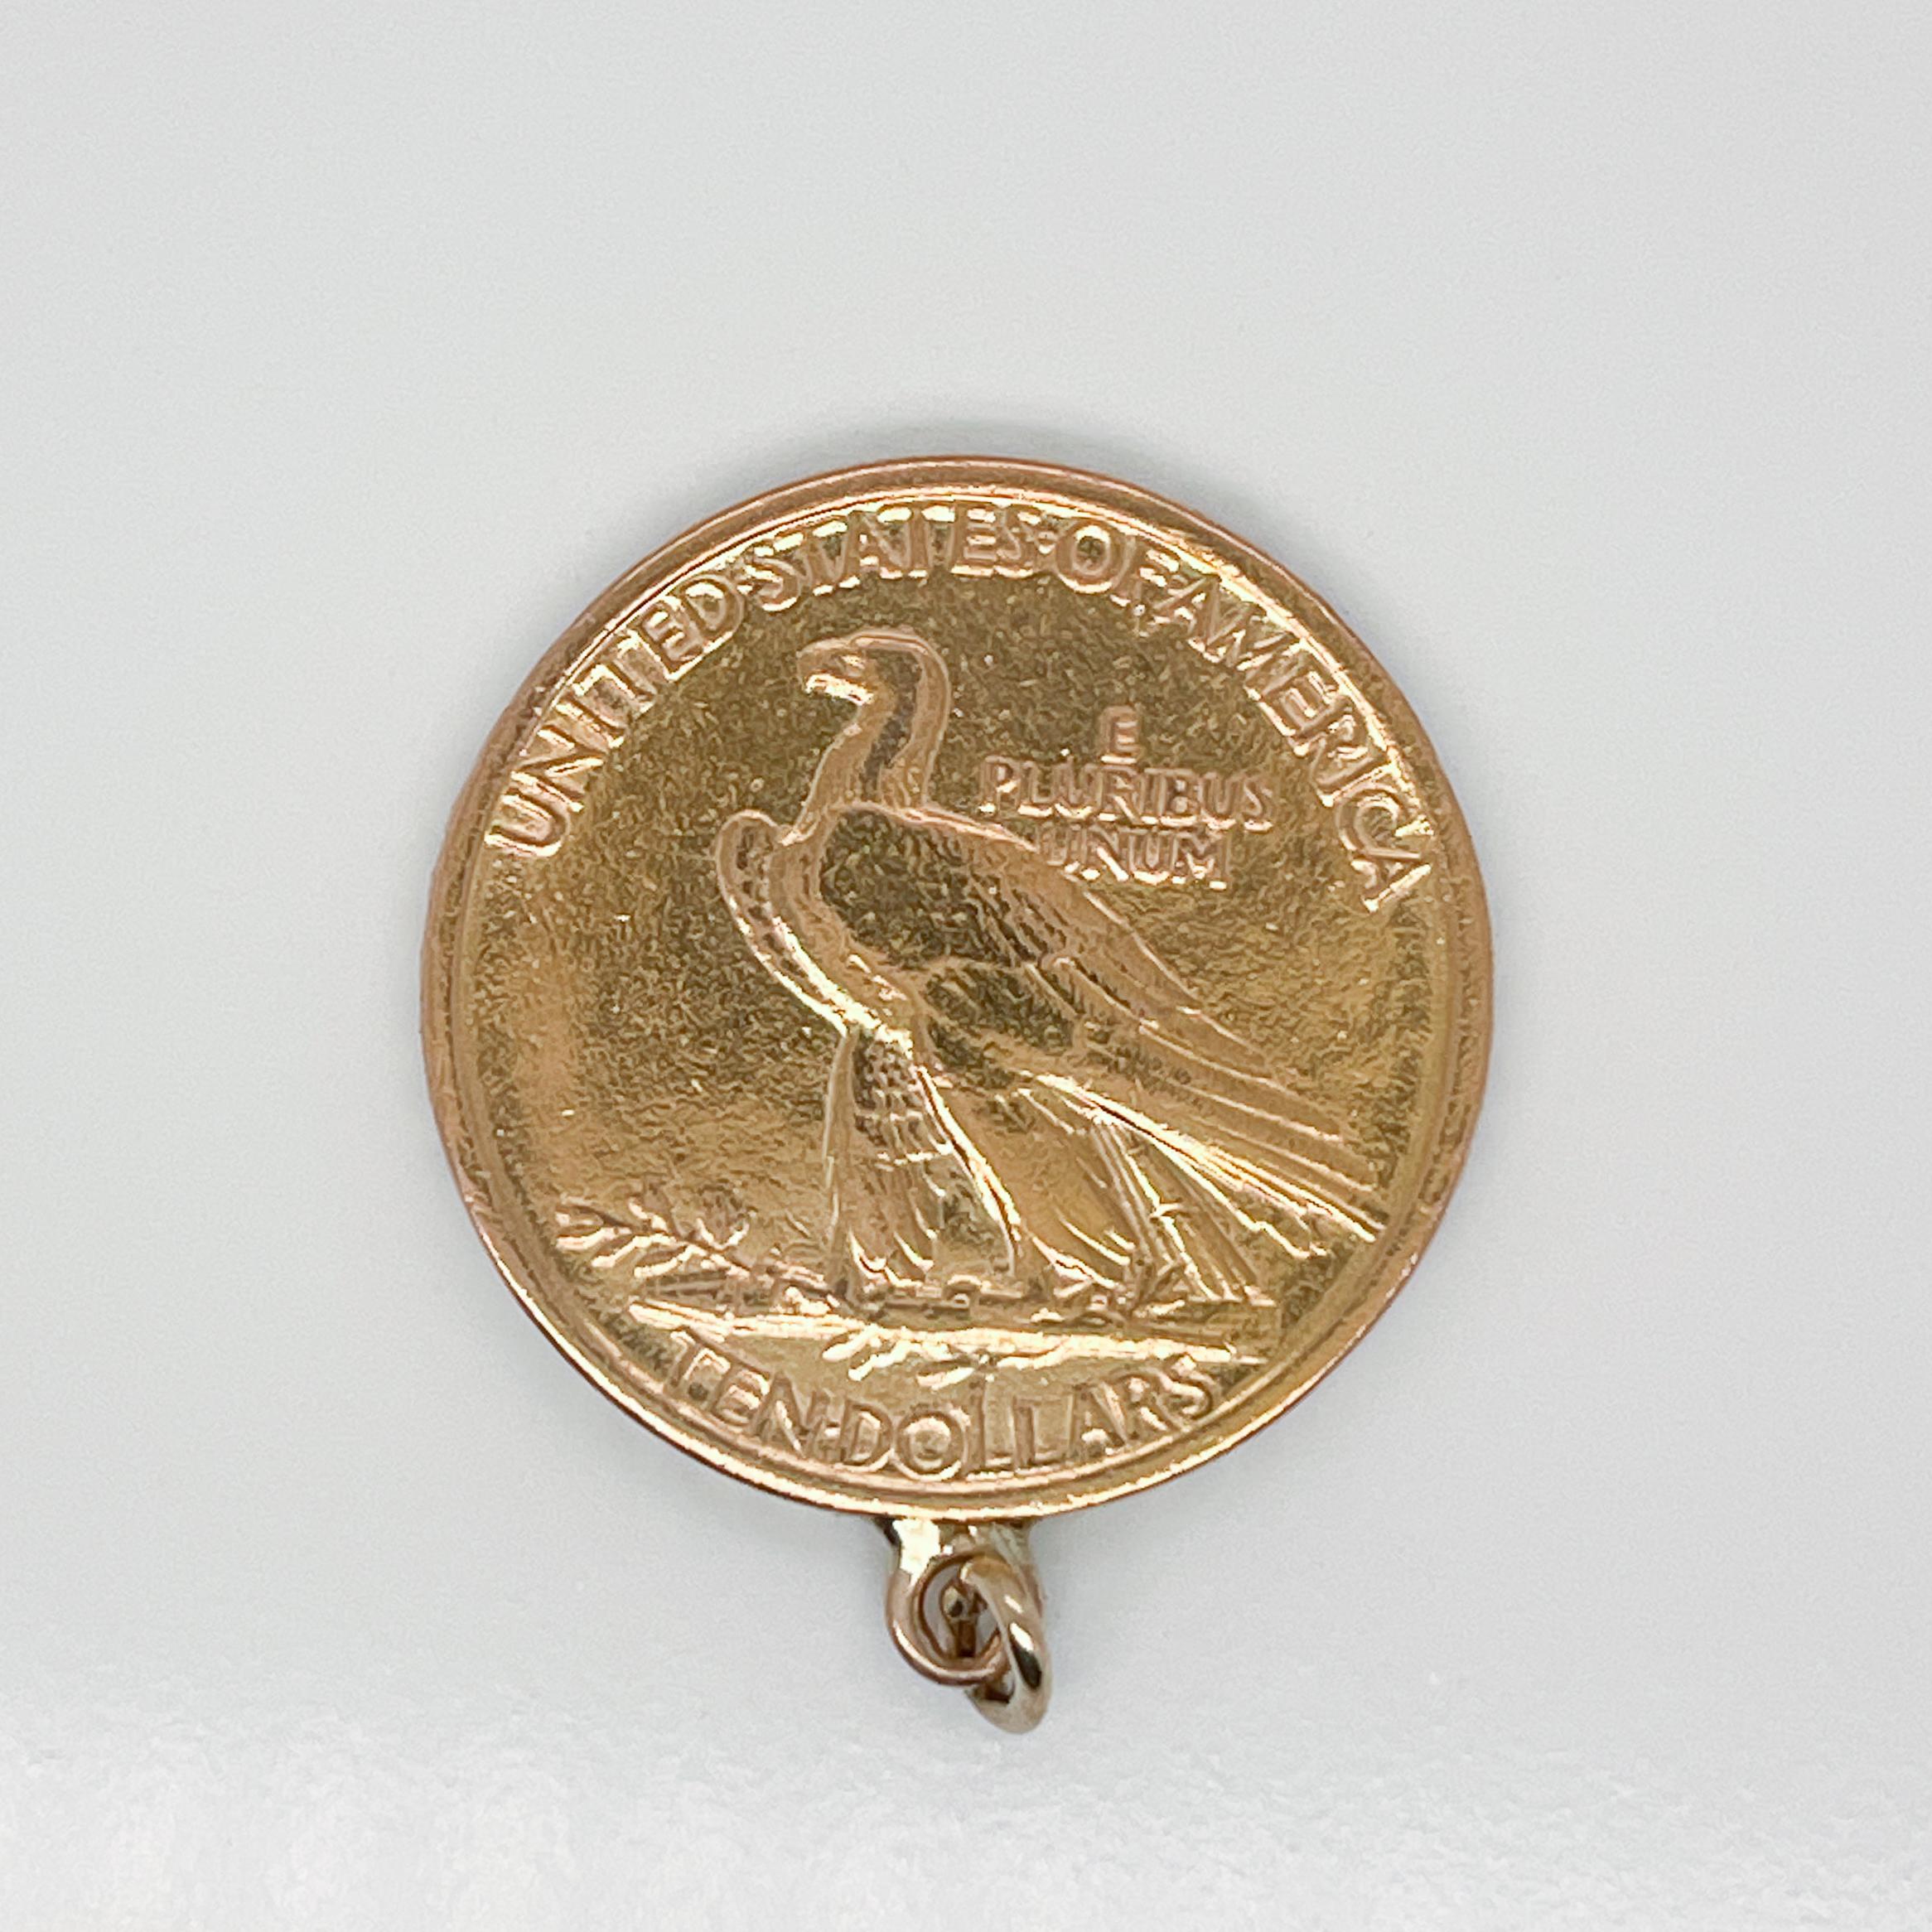 Modern Antique Indian Head $10 US Gold Coin Pendant for a Necklace